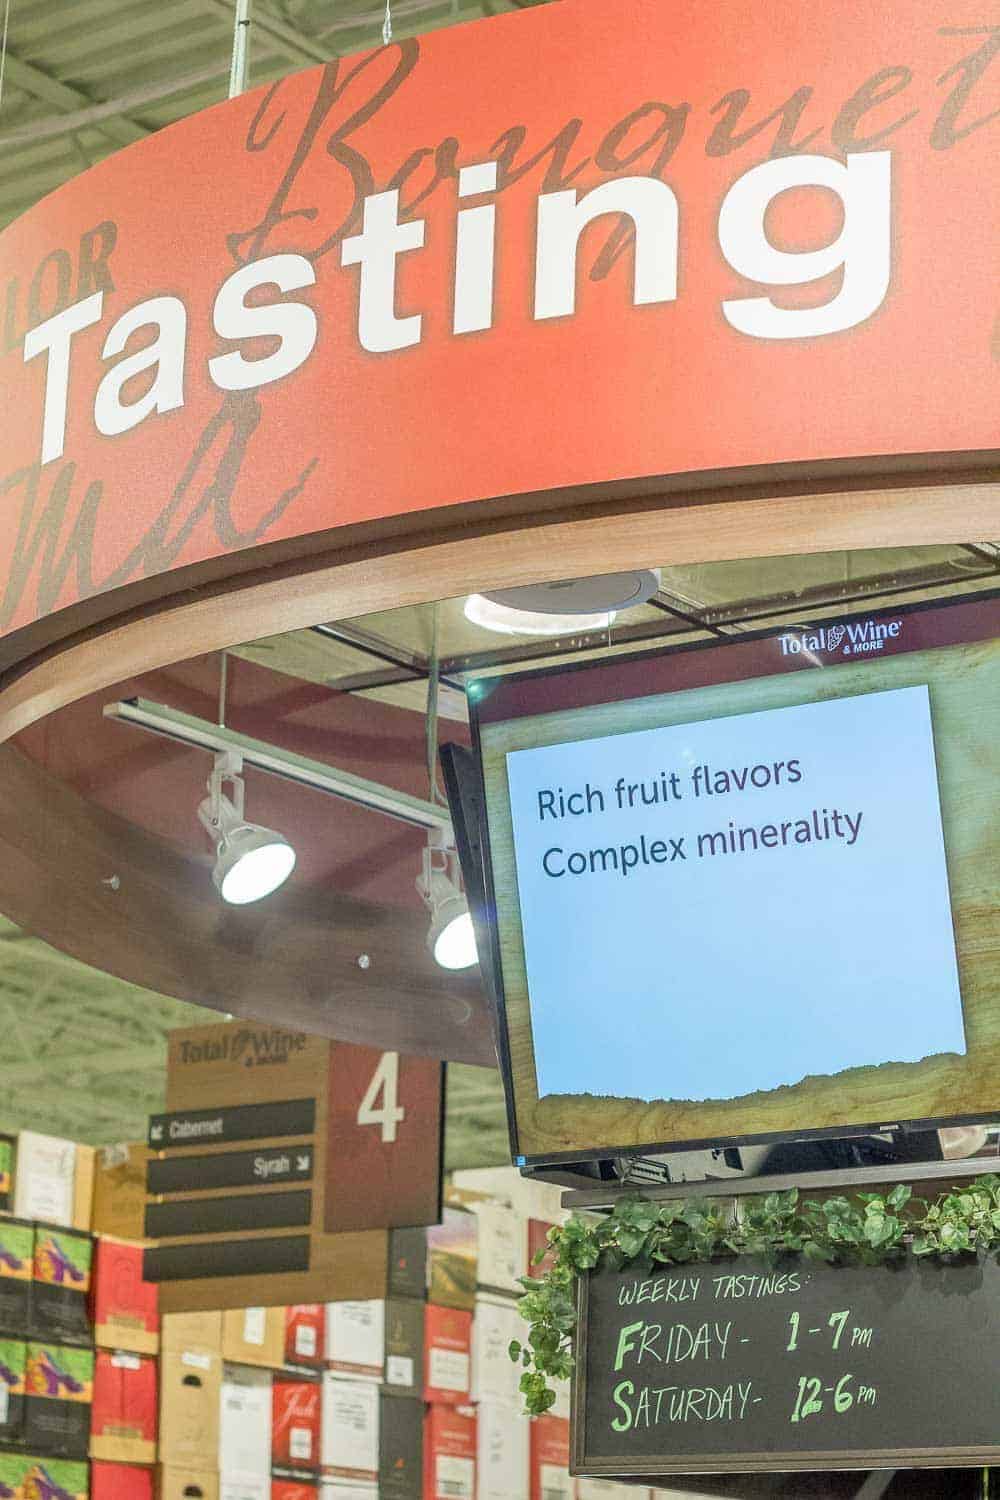 Learn all about wine at Total Wine & More's scheduled tastings.